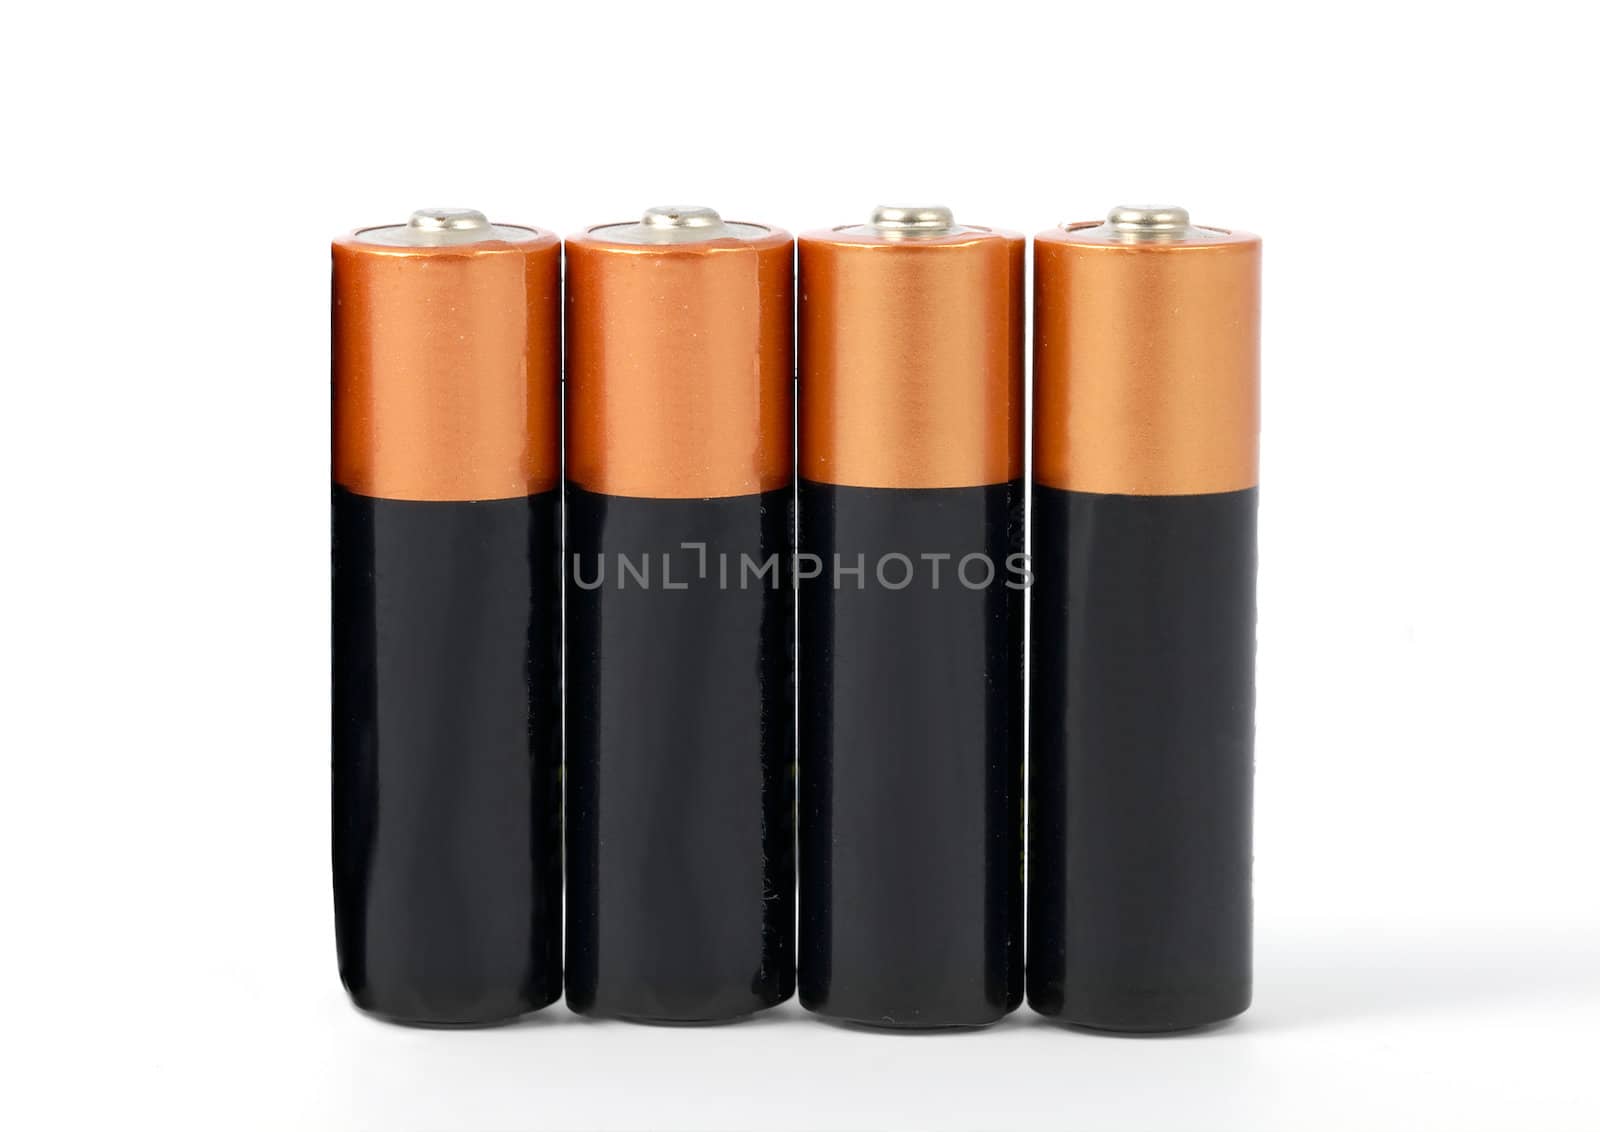 A set a of AA size batteries on white background